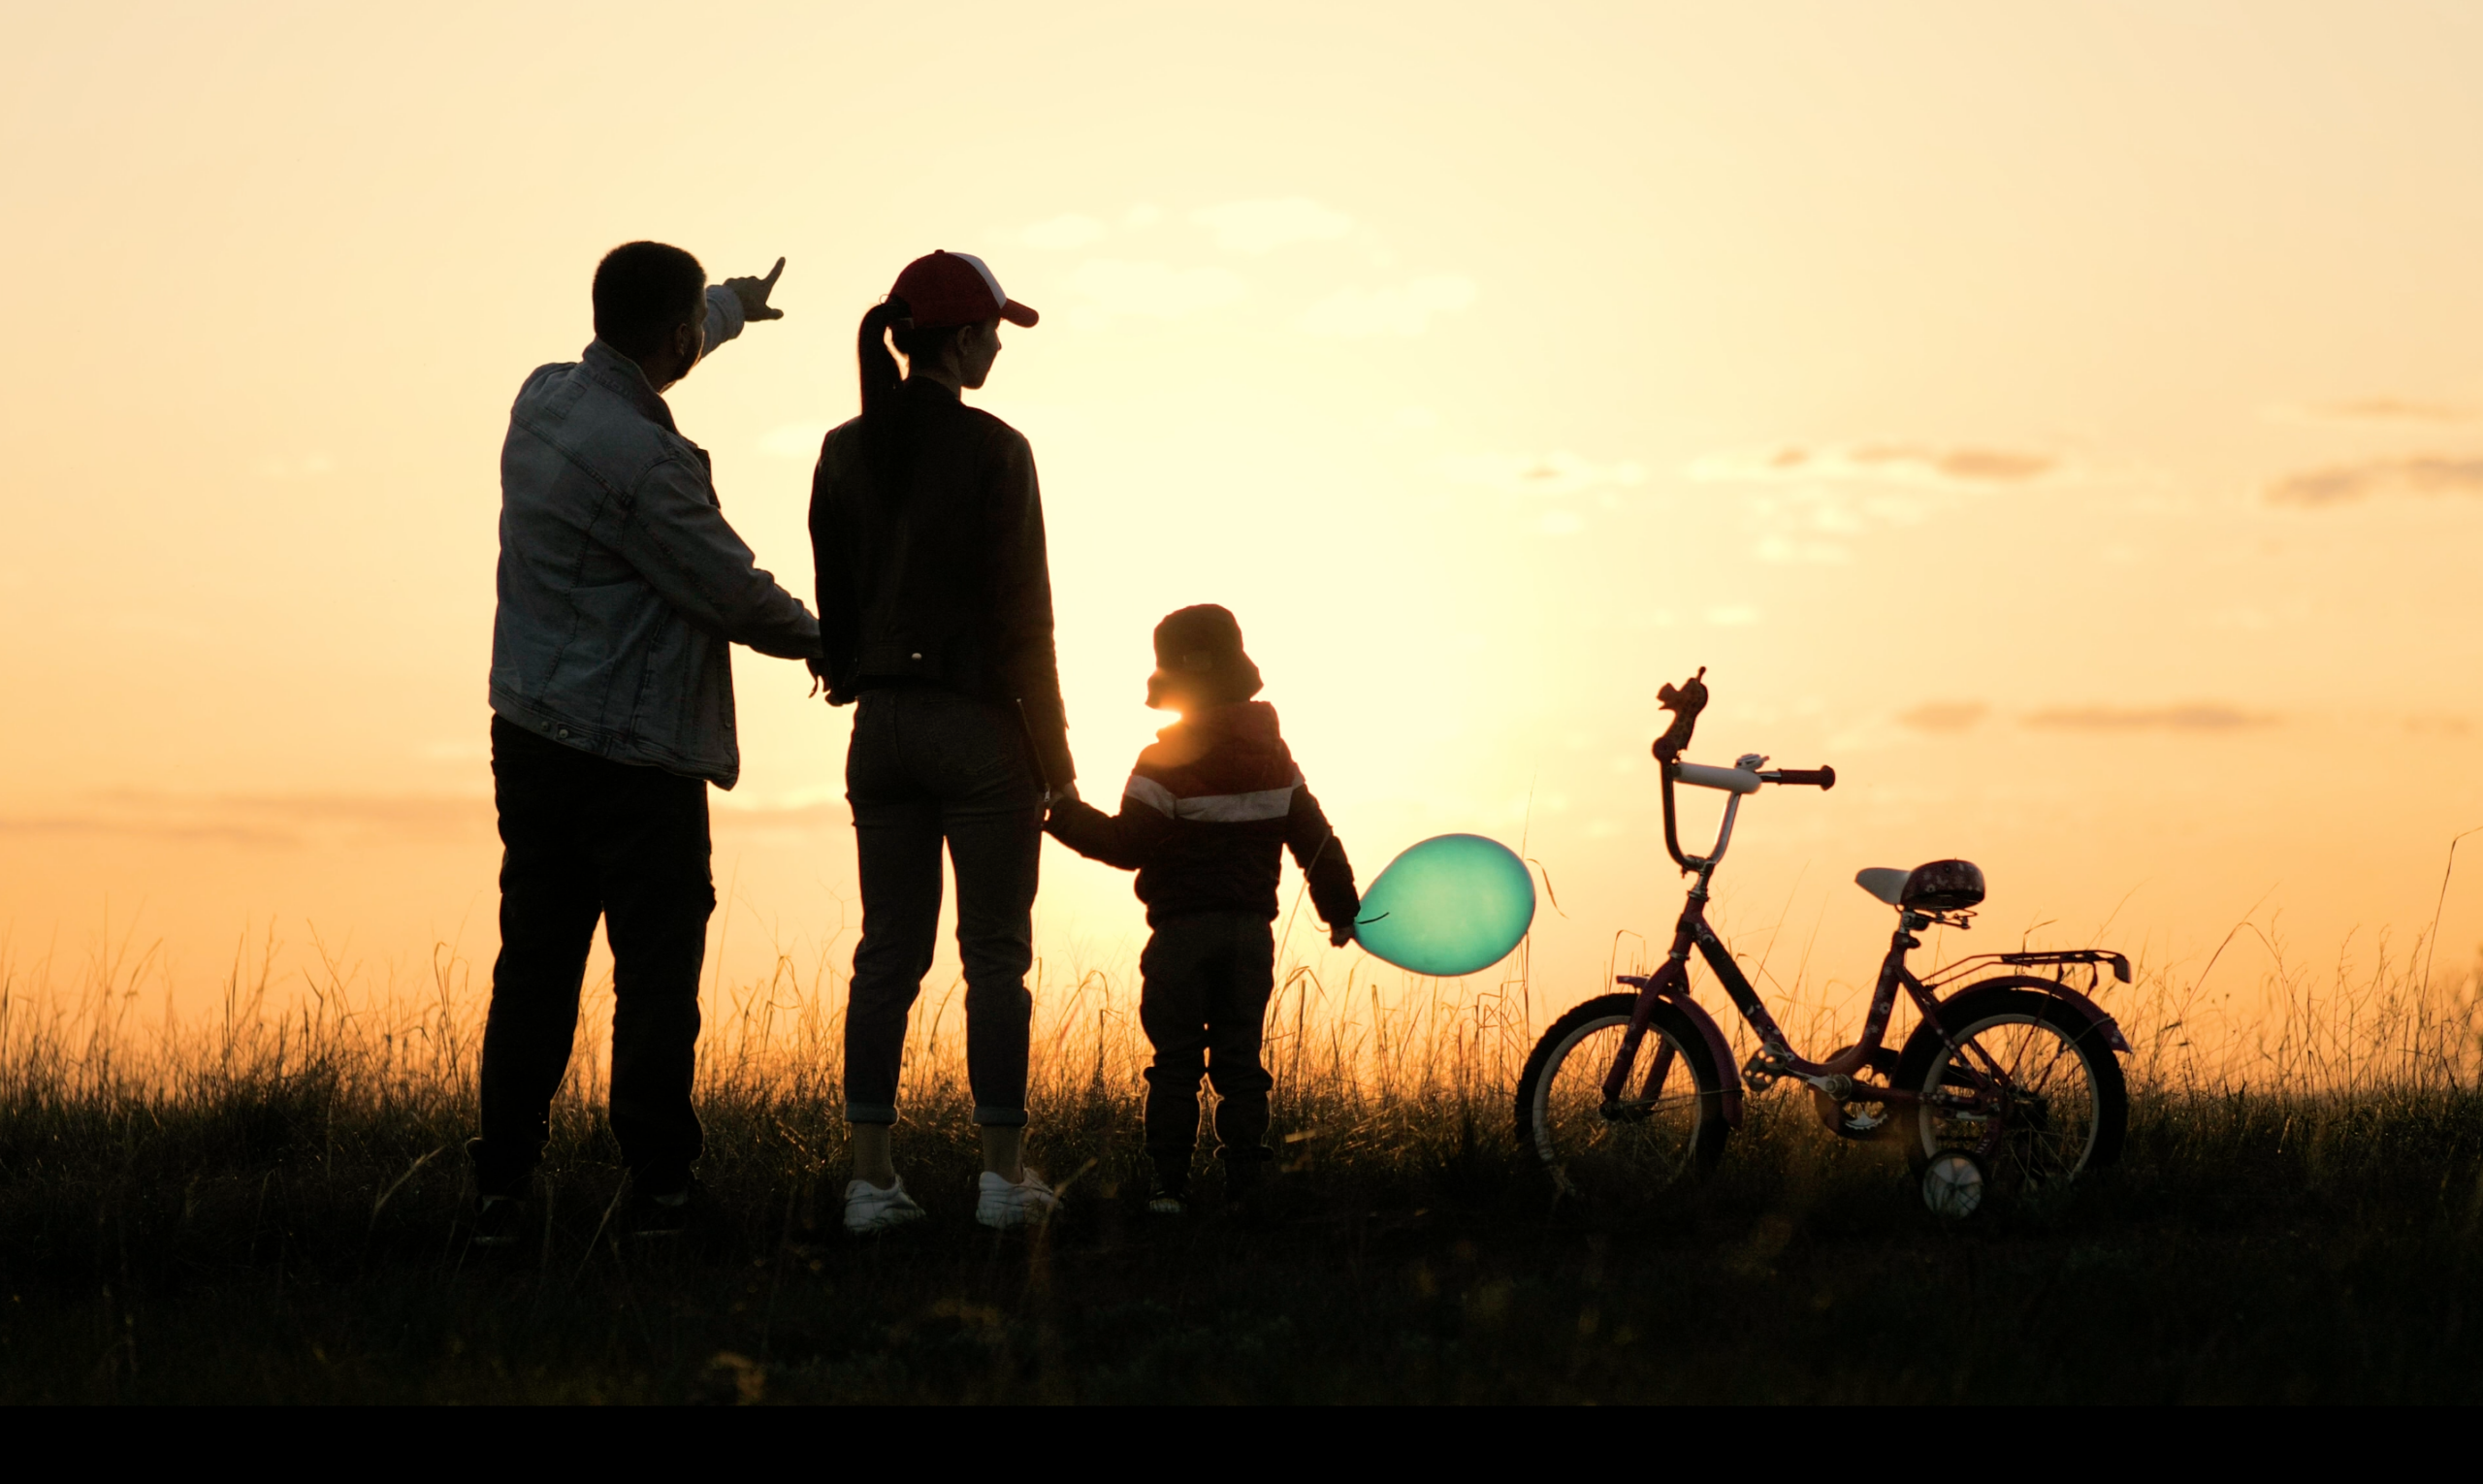 Screenshot of stock footage item on. Scene shows a family of two adults and a young child silhouetted against a sunset. A child's bike is near them 